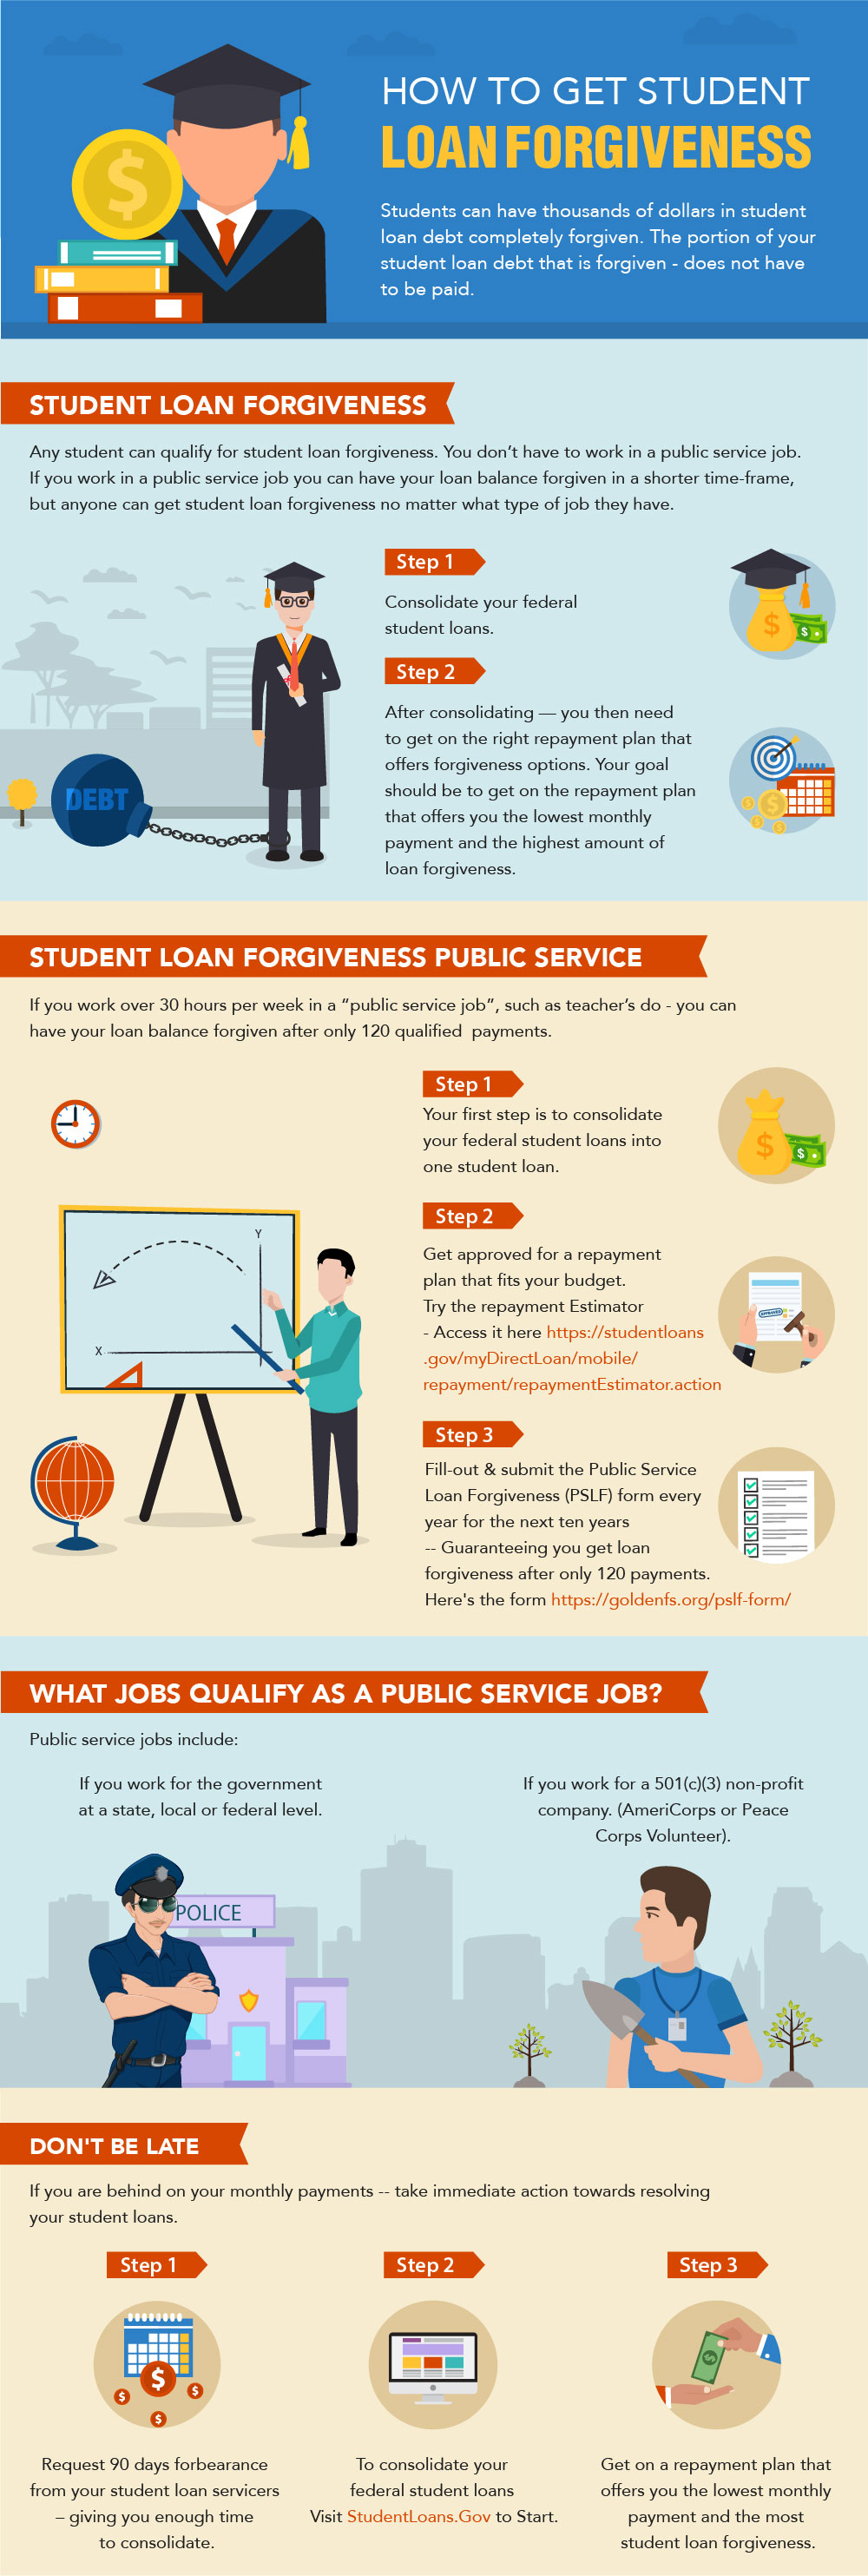 How to Get Student Loan Forgiveness [Infographic]